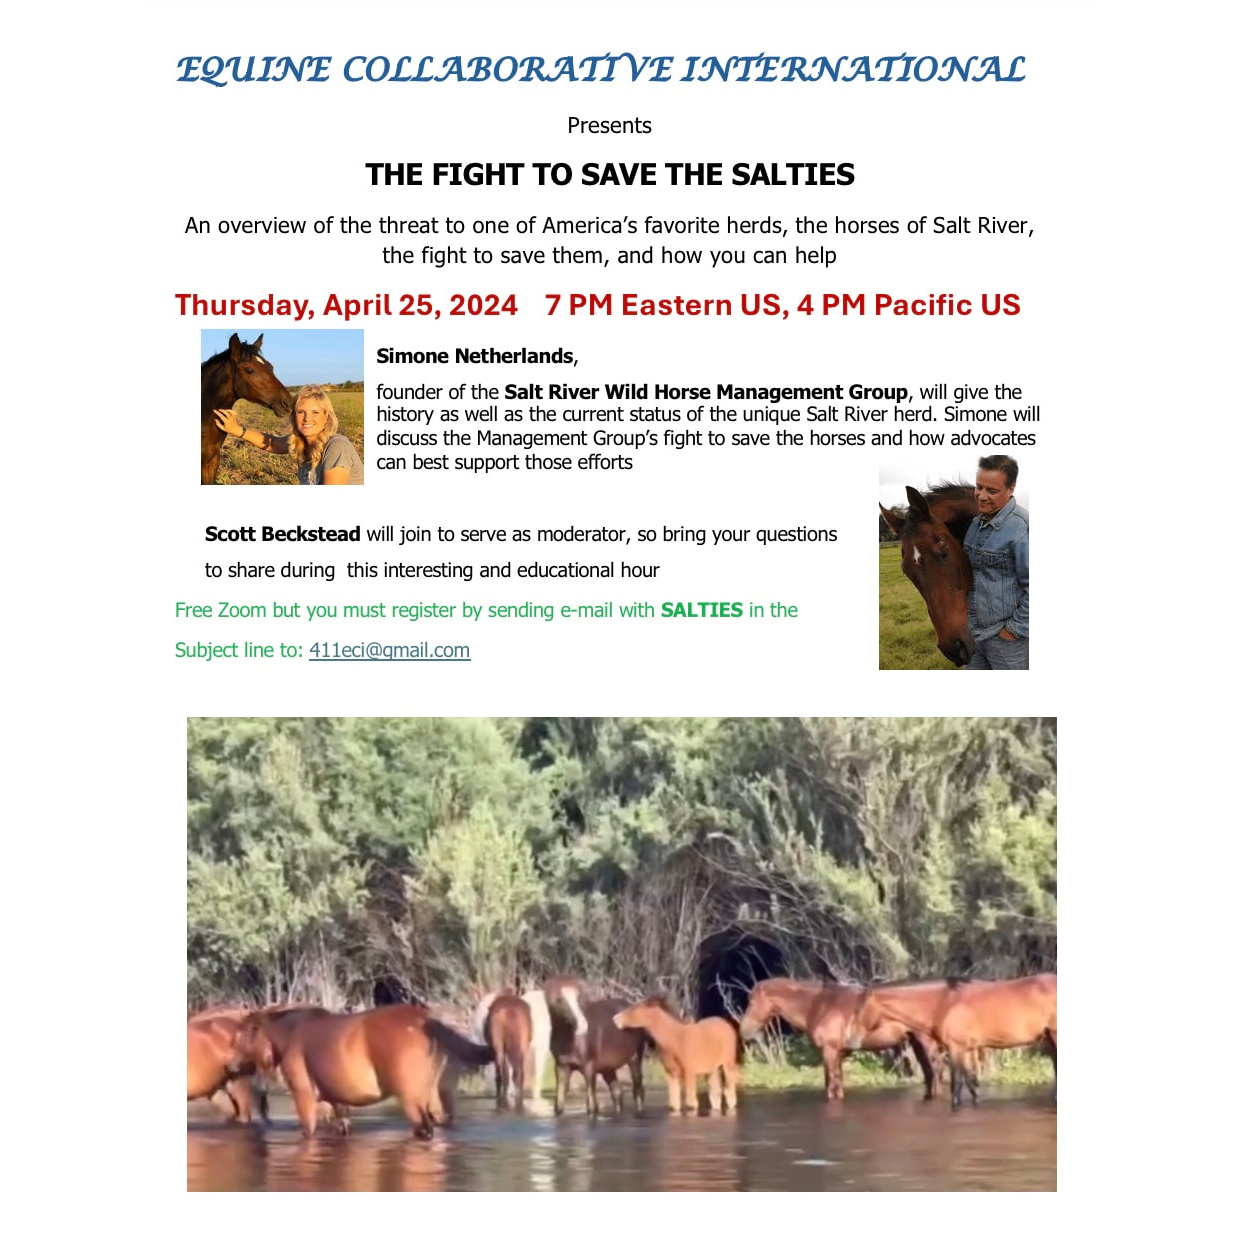 Watch Simone’s recorded interview with Equine Collaborative International!